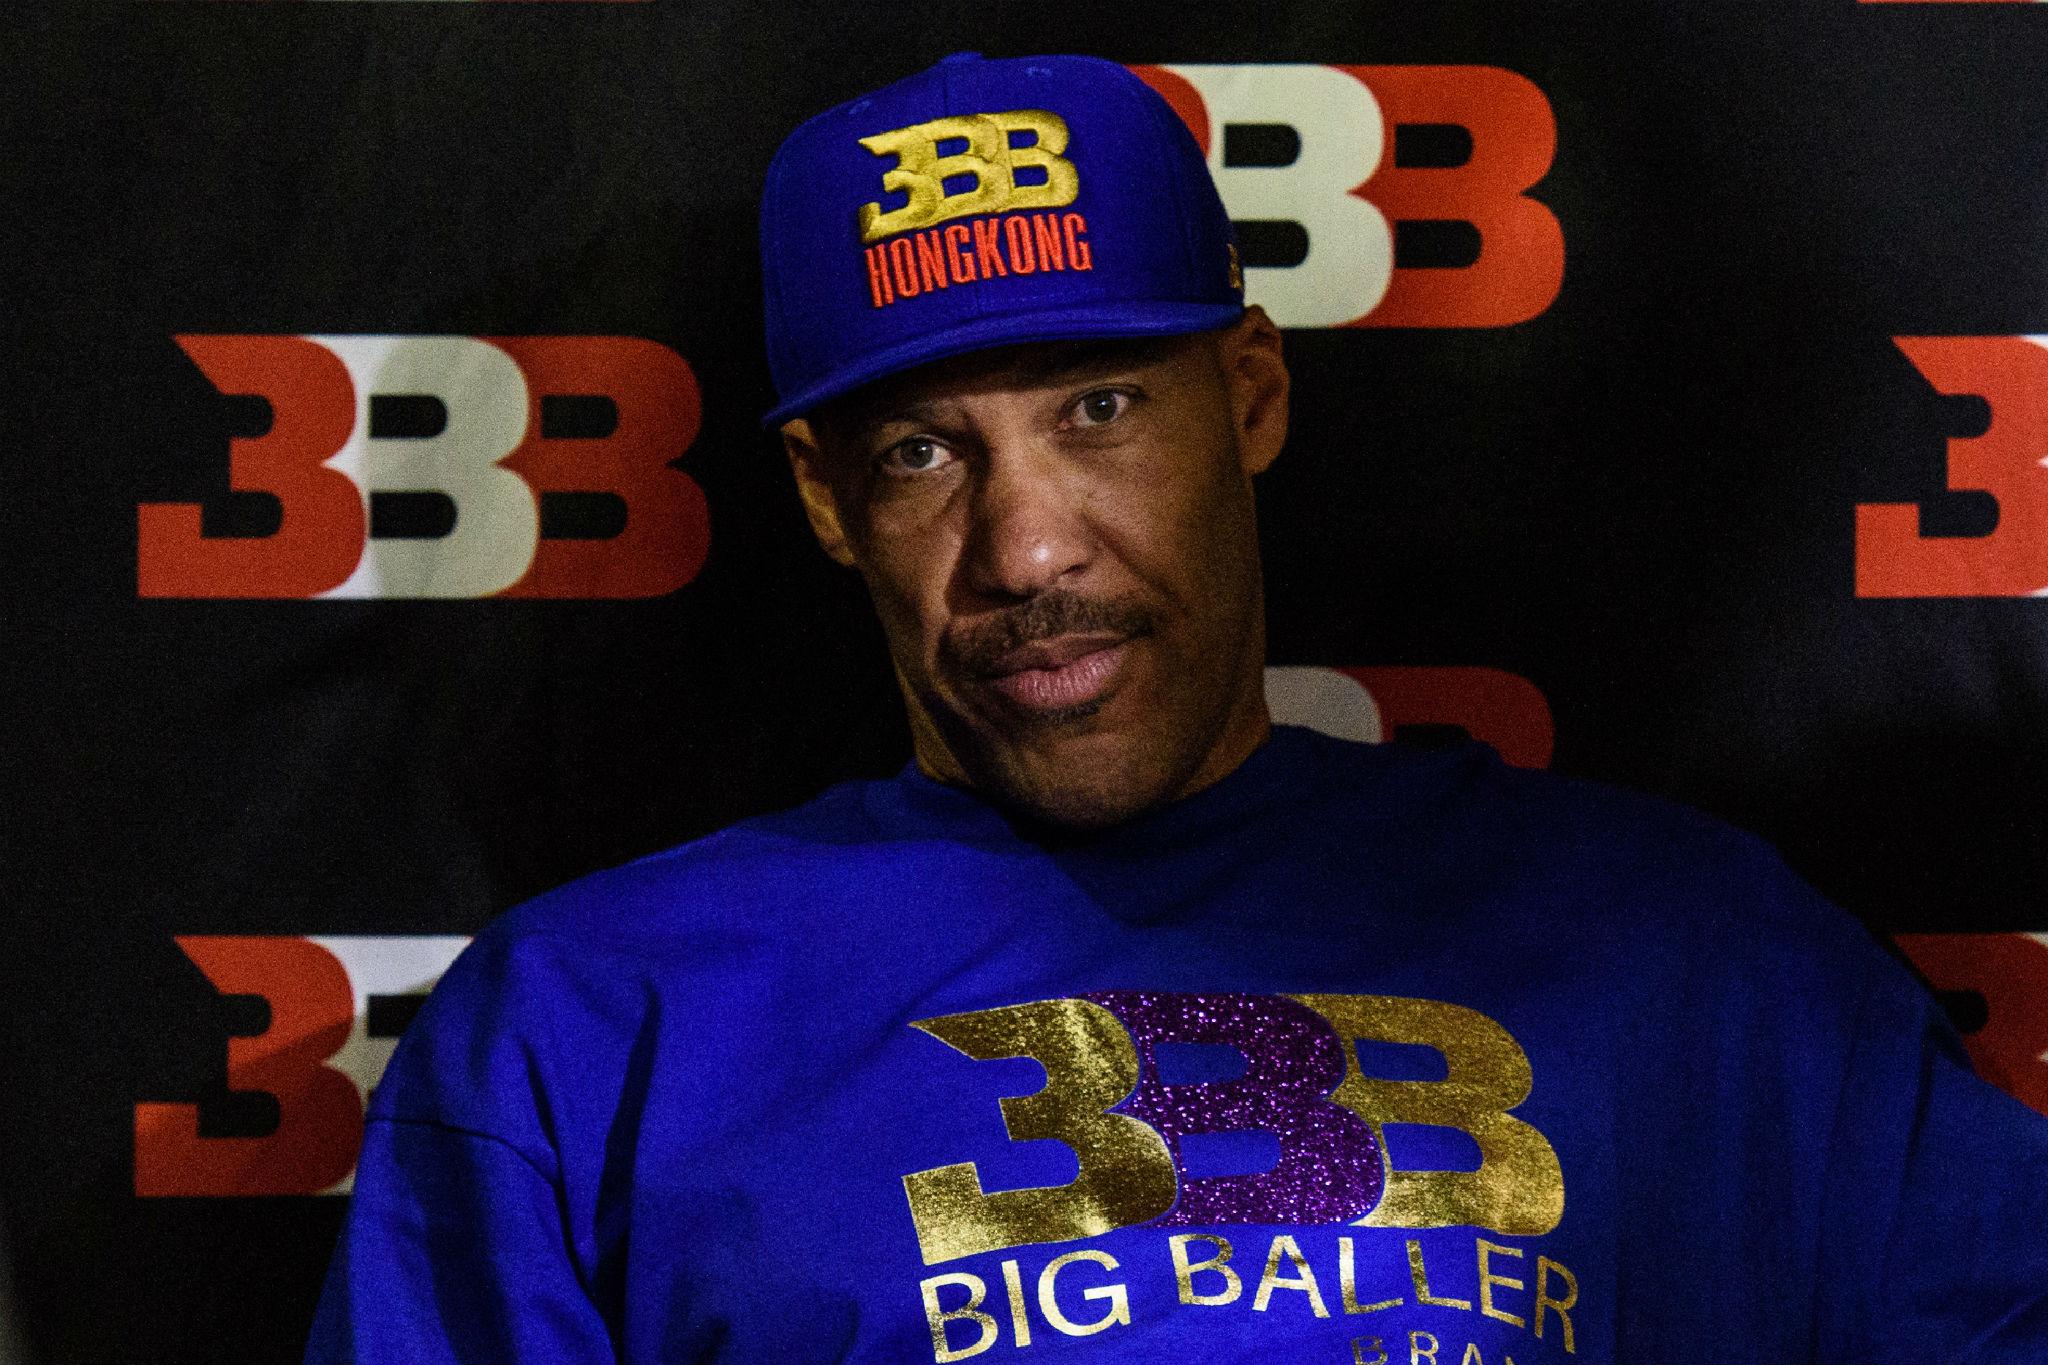 LaVar Ball, father of basketball player LiAngelo Ball and the owner of the Big Baller brand, attends a promotional event in Hong Kong on November 14, 2017 (ANTHONY WALLACE/AFP/Getty Images)